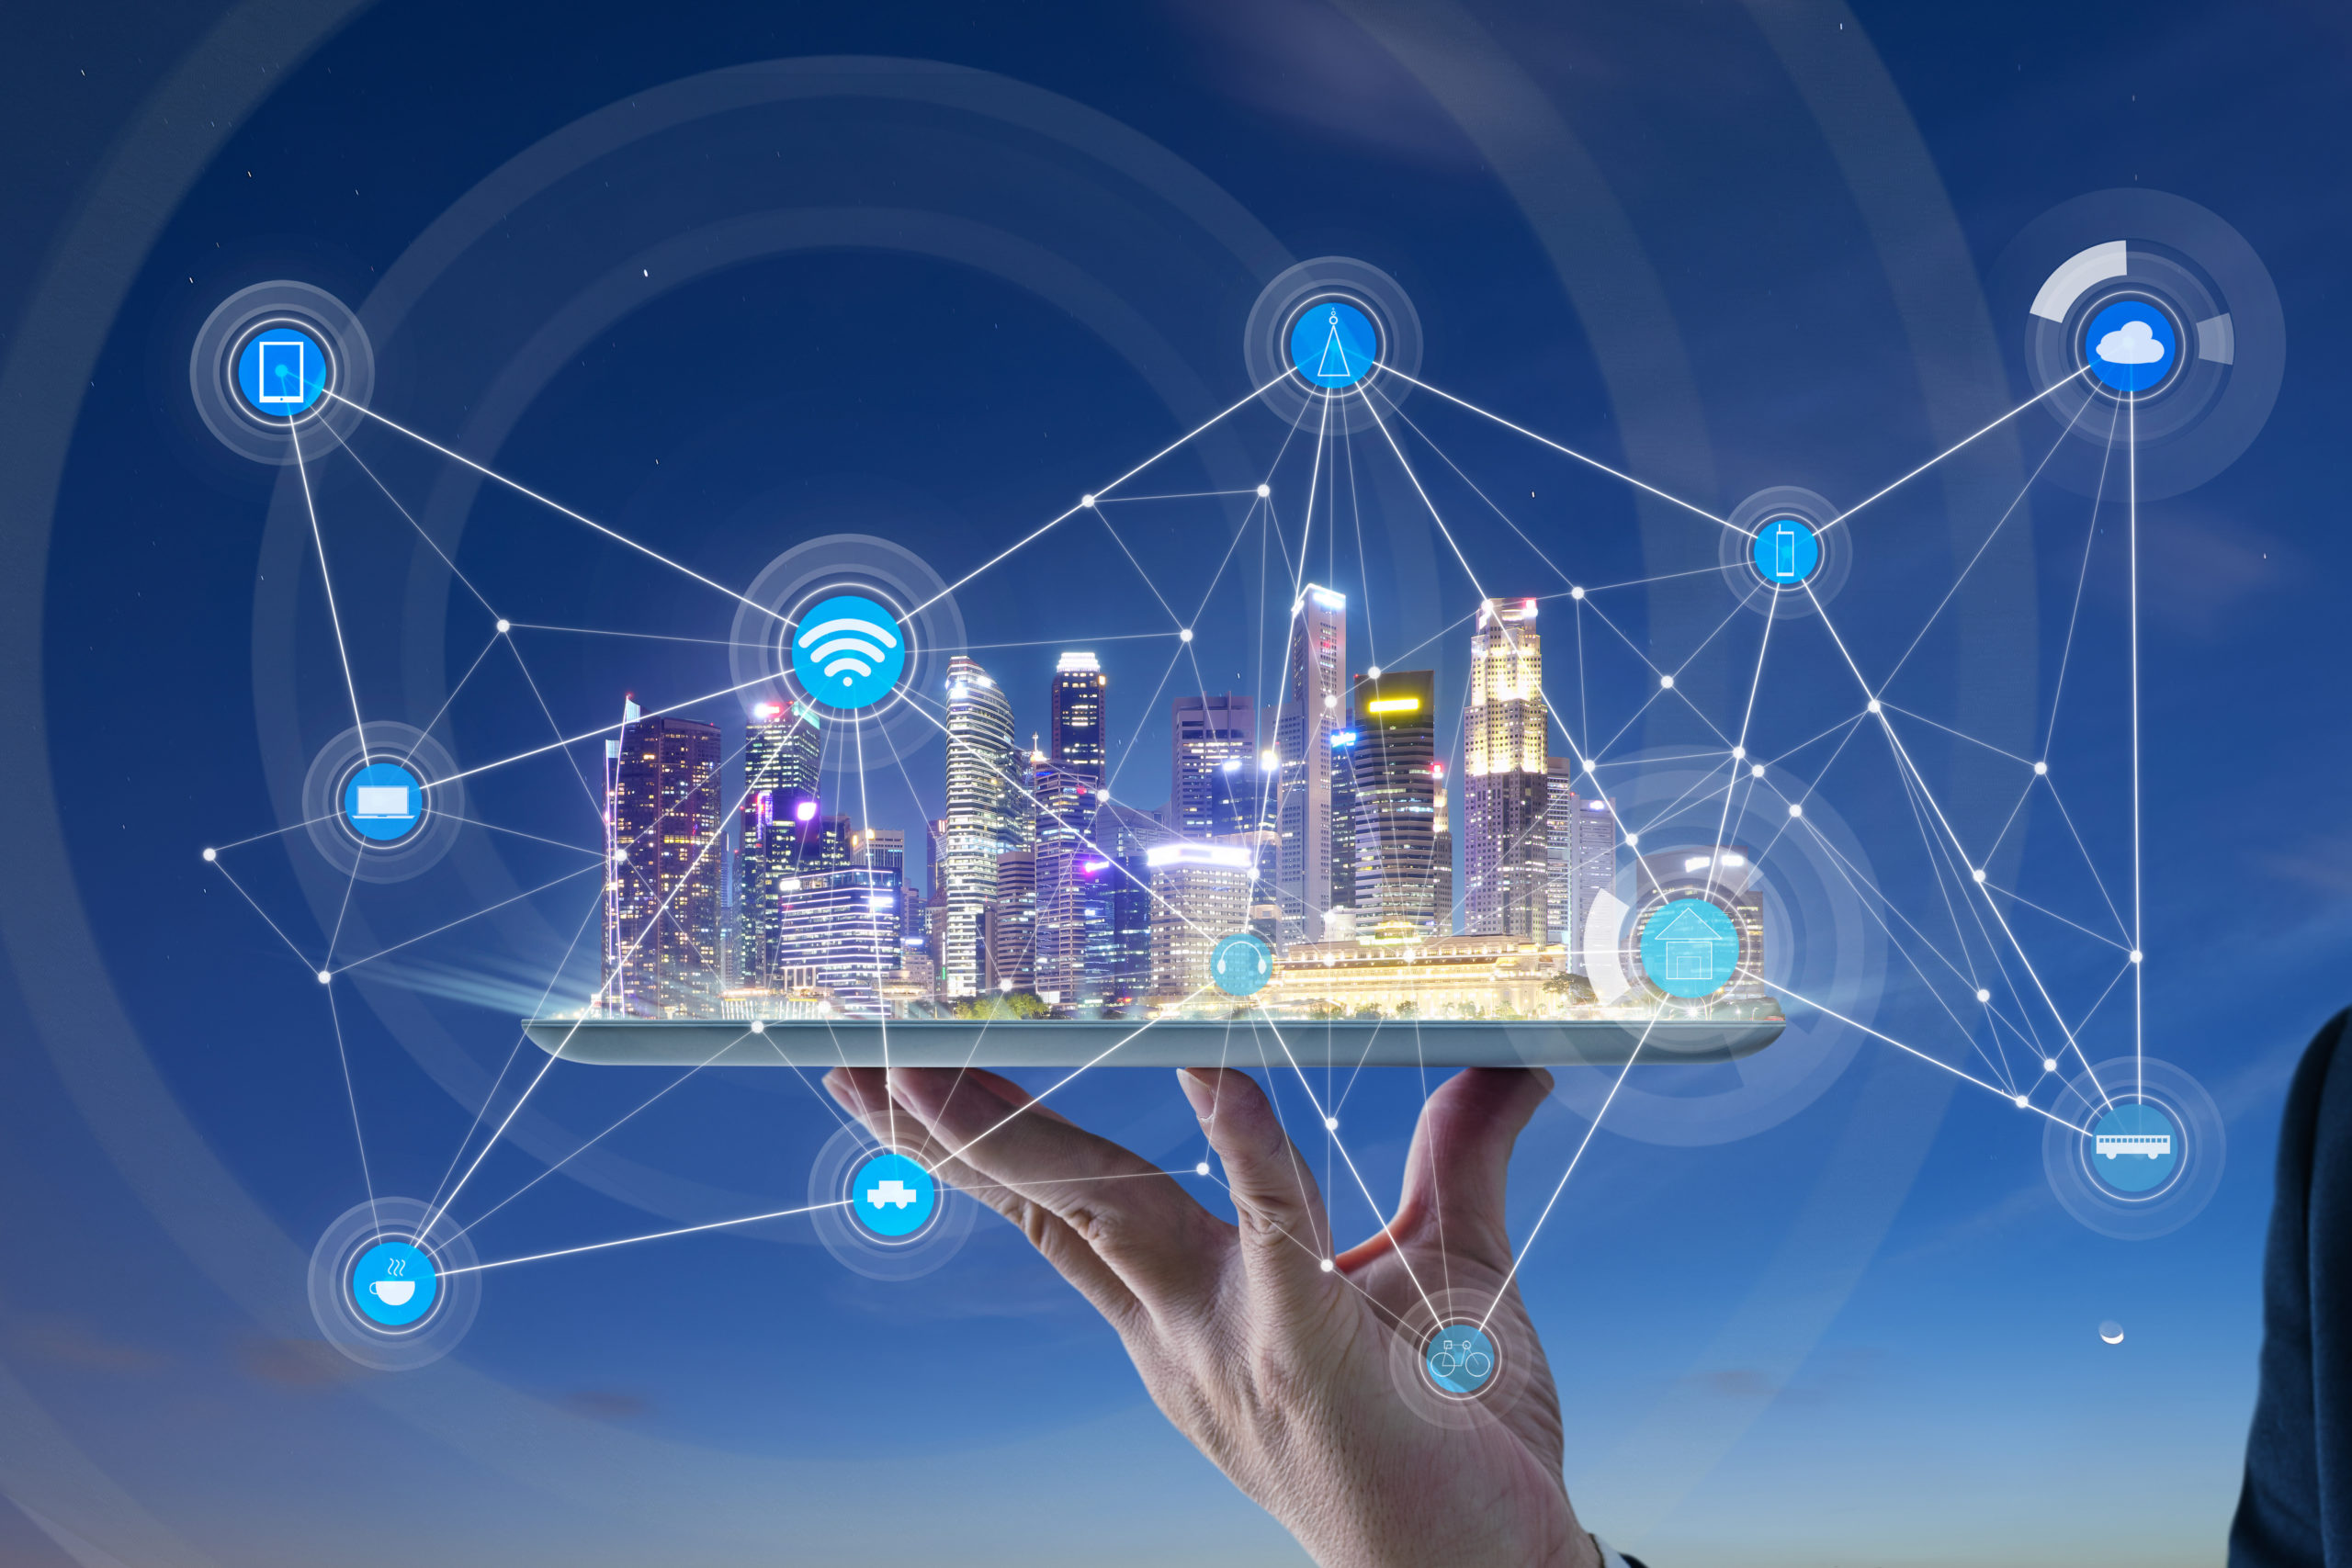 Featured Image. Hand holding a digital tablet with a city with smart services and icons, internet of things, and networks appearing from the tablet